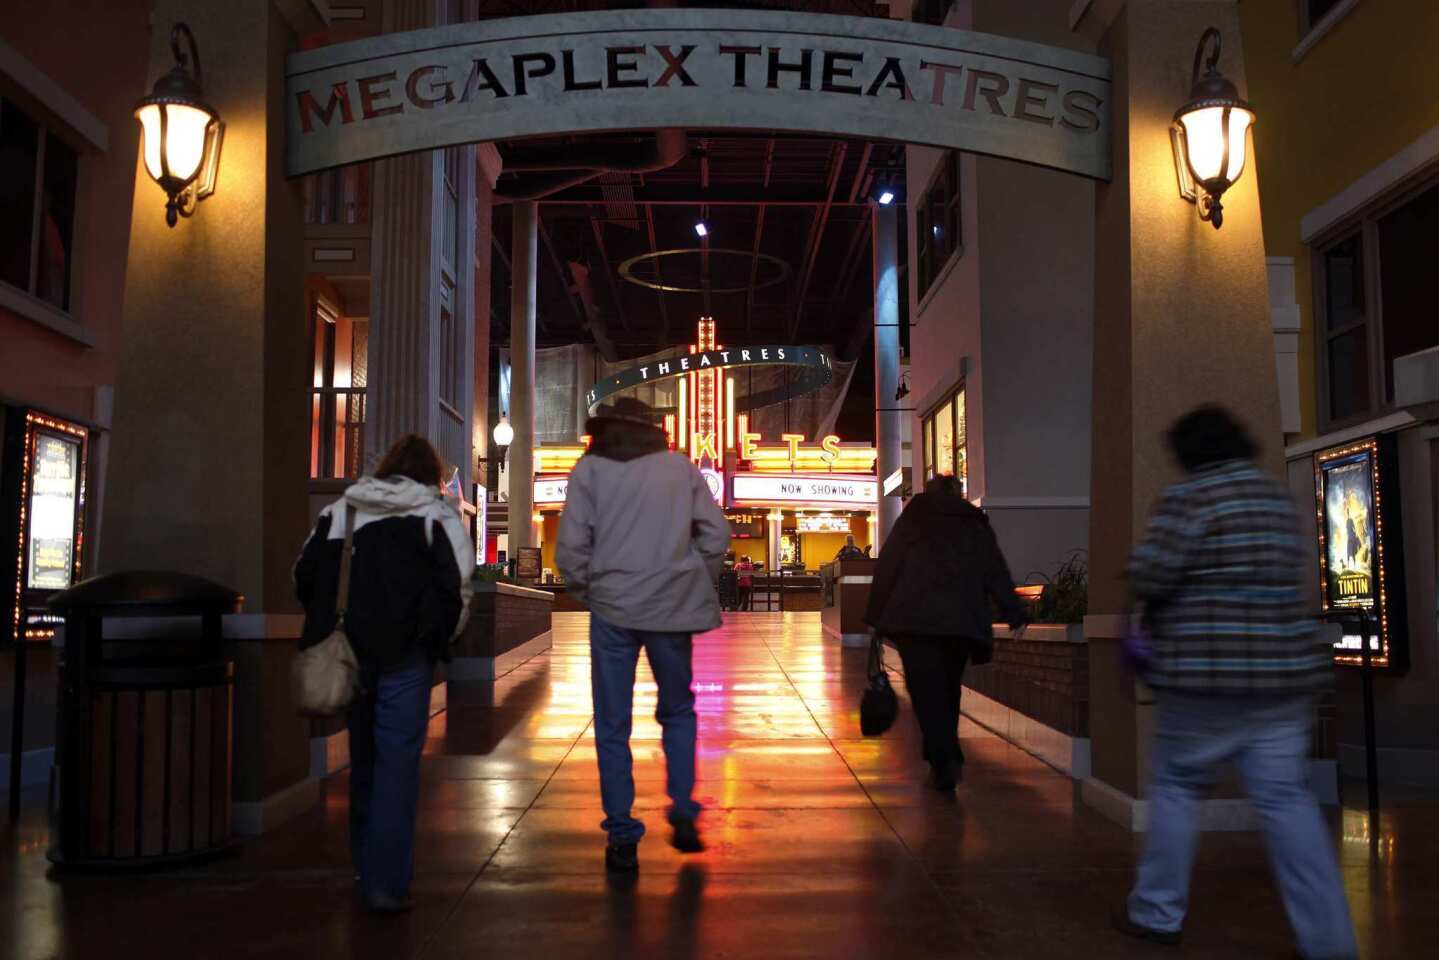 The Megaplex 17 at Jordan Commons, in Sandy, Utah, sold more tickets to the final "Harry Potter" film than any other theater in the country with $360,400 in receipts.